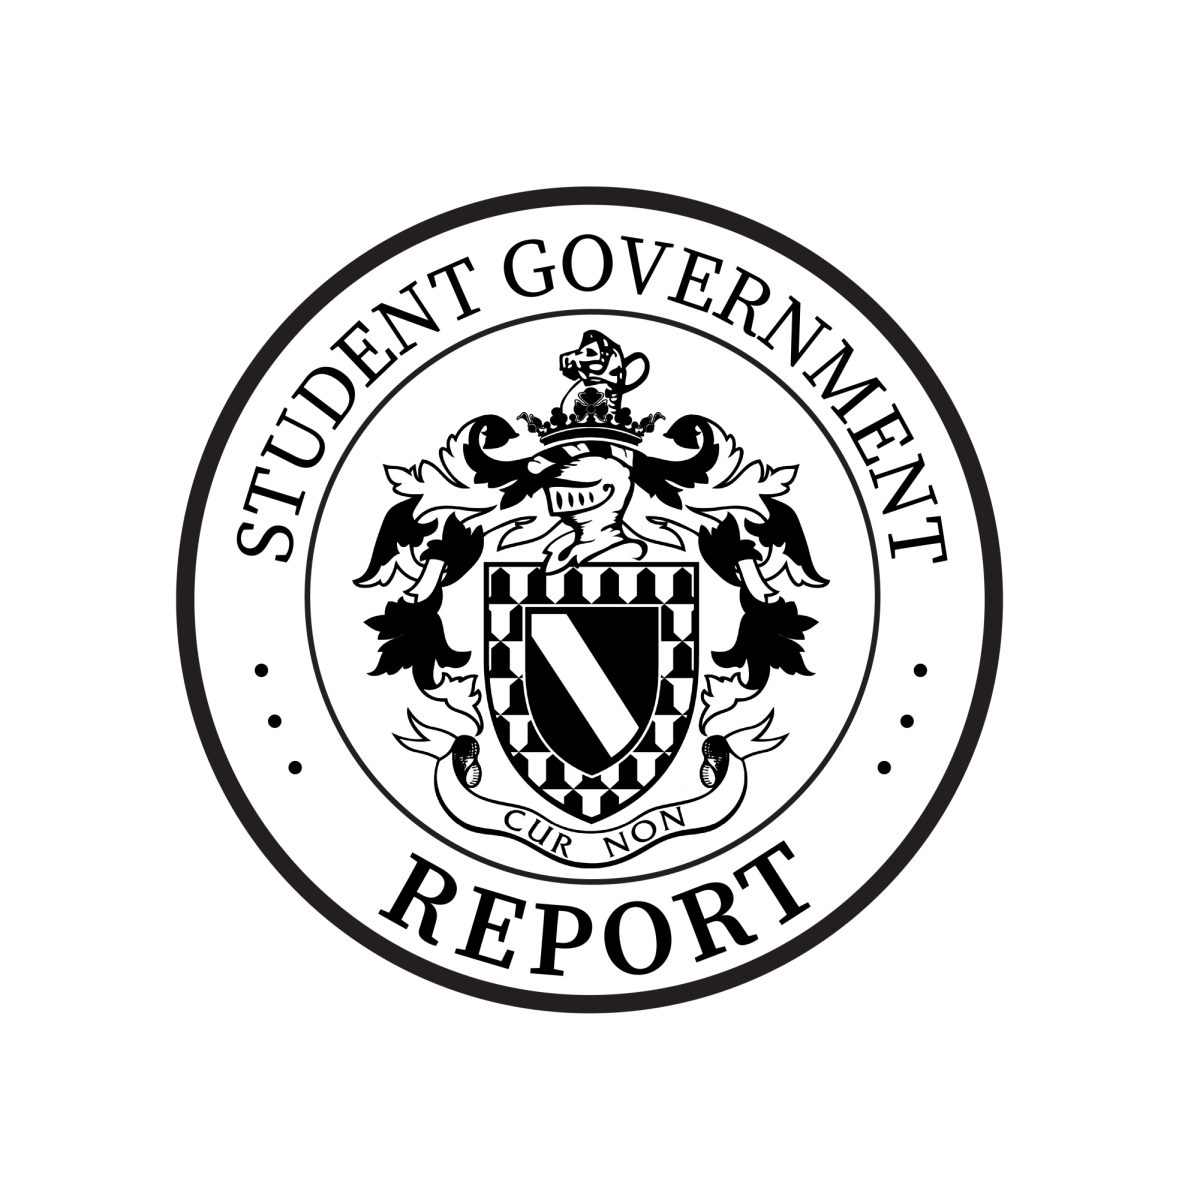 Student government report: Feb. 22